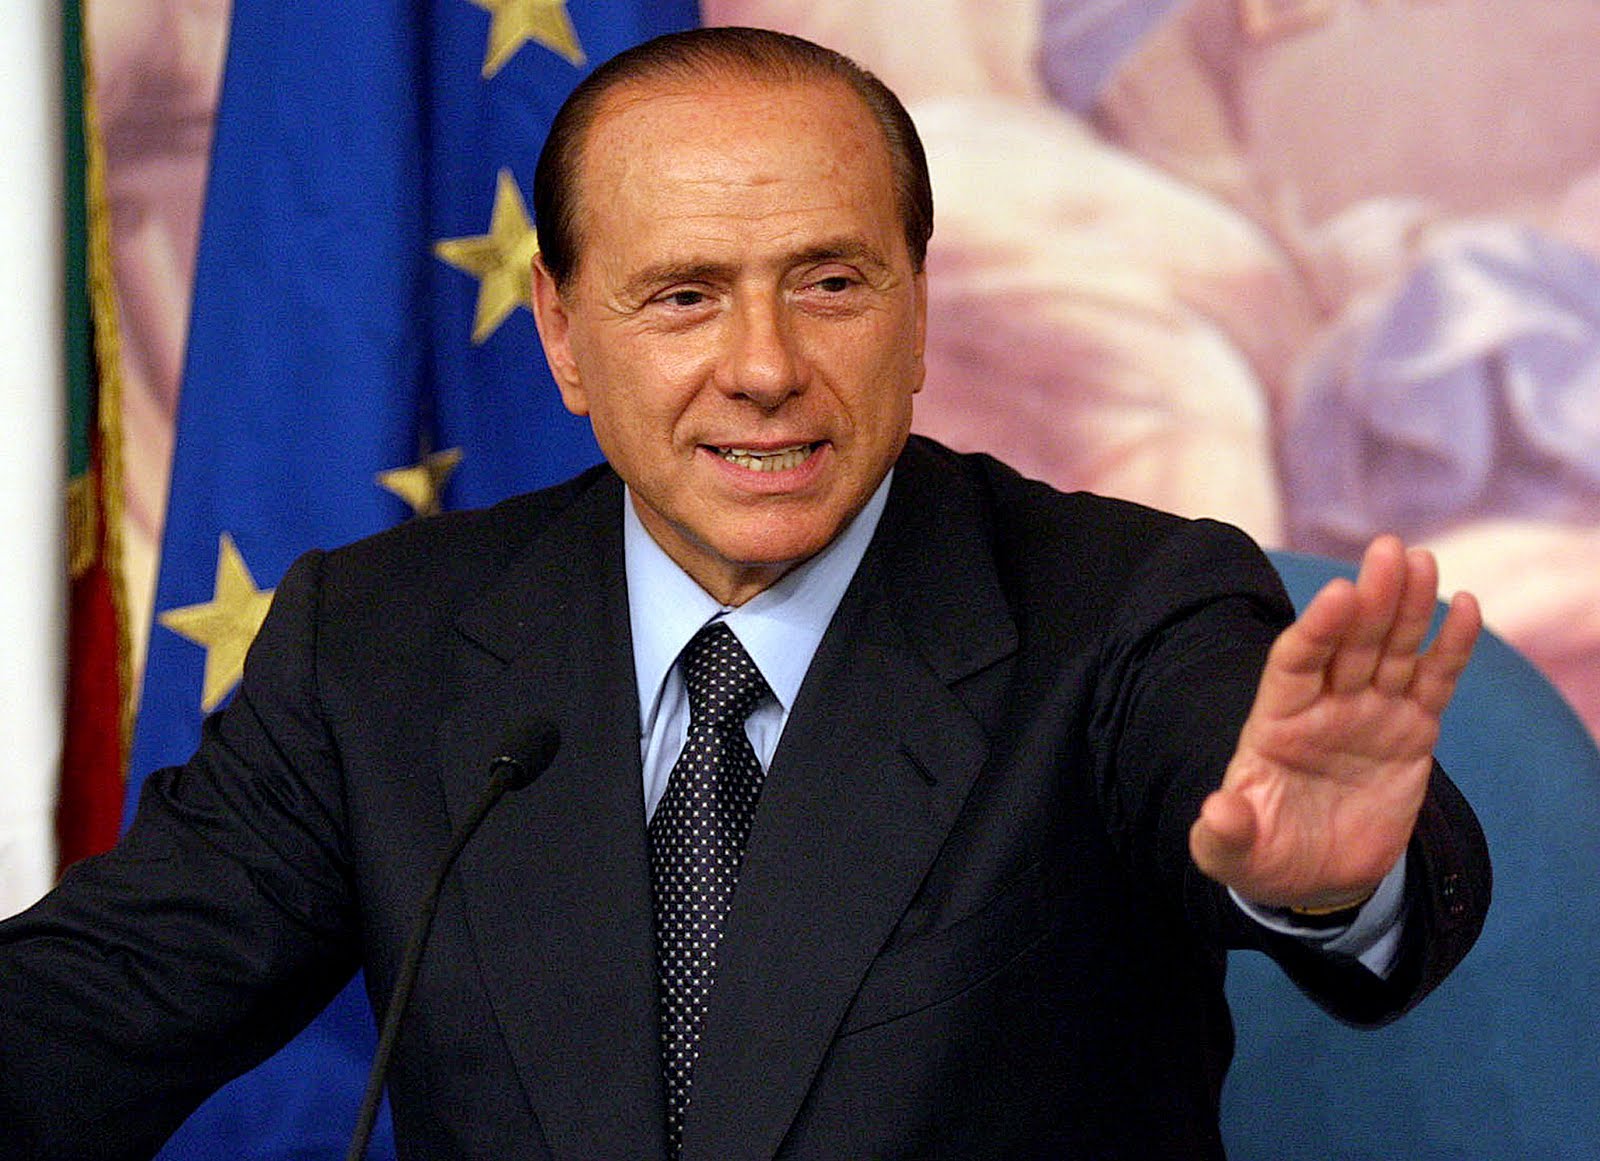 silvio-berlusconi-the-hands-of-the-prime-minister-of-italy